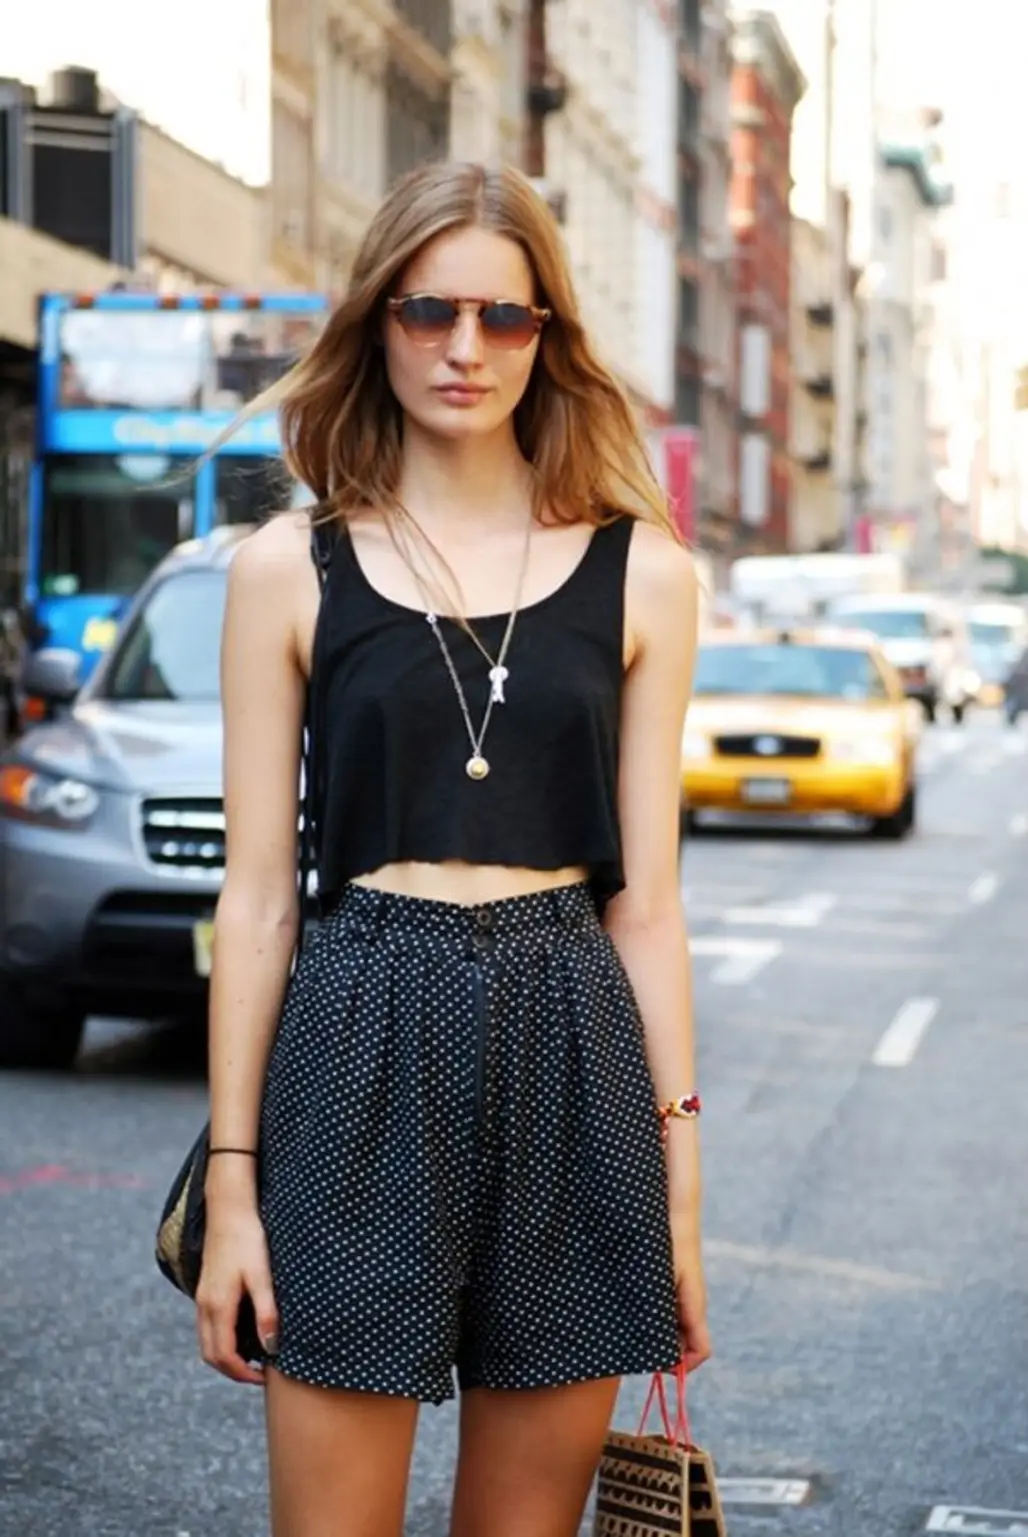 7 Awesome Streetstyle Ways to Wear Polka-dots